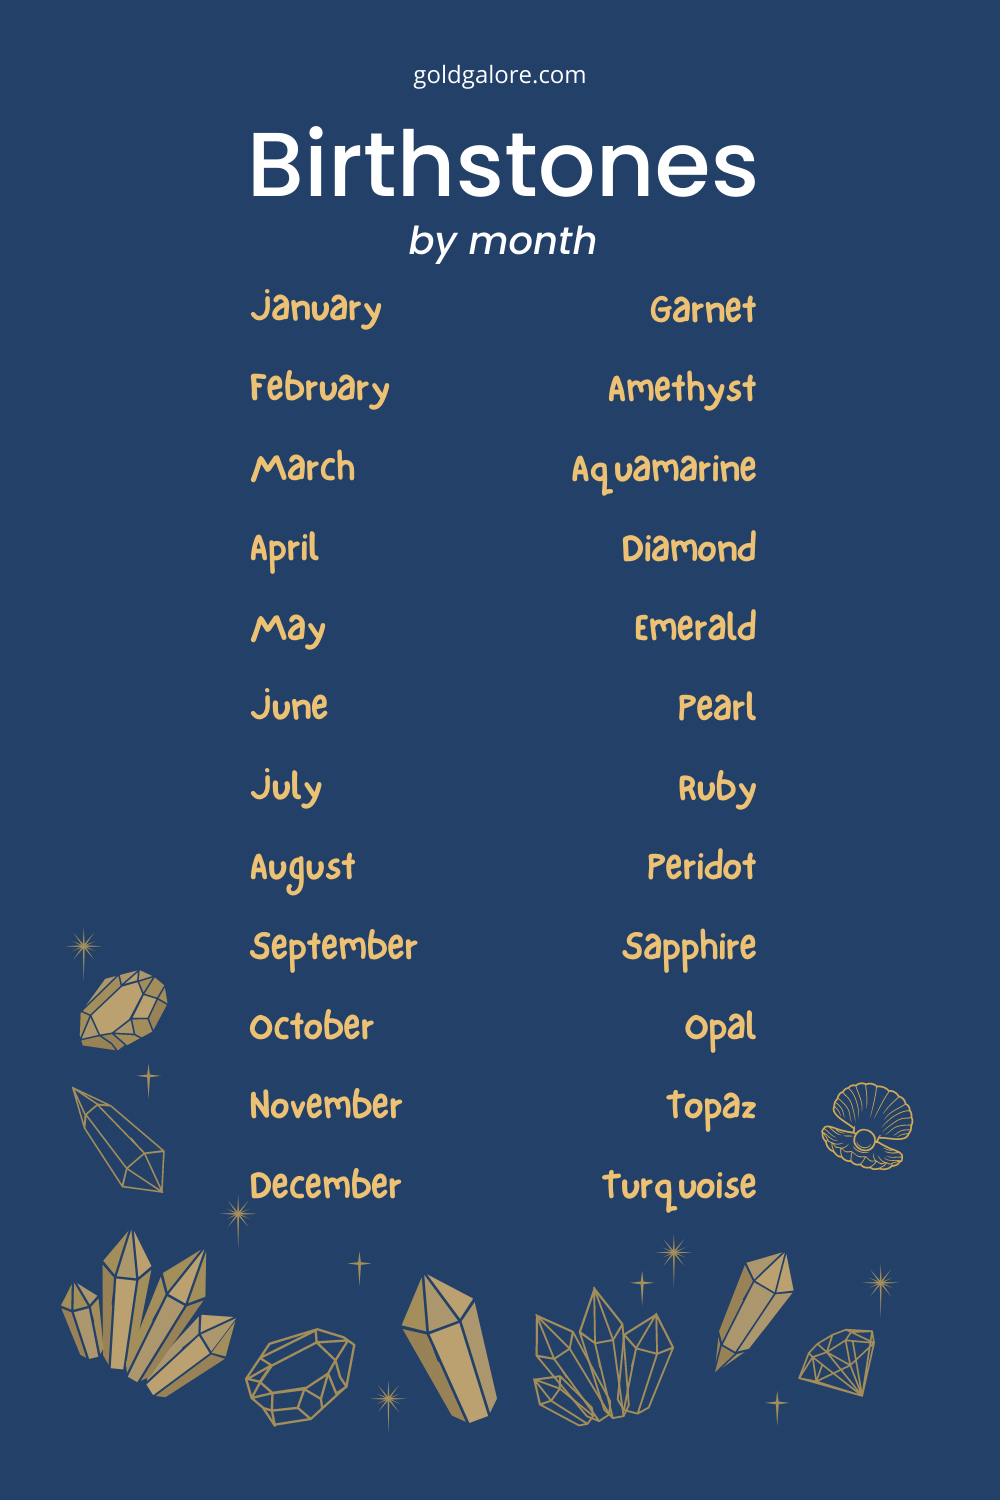 A list of birthstones by month on a blue background